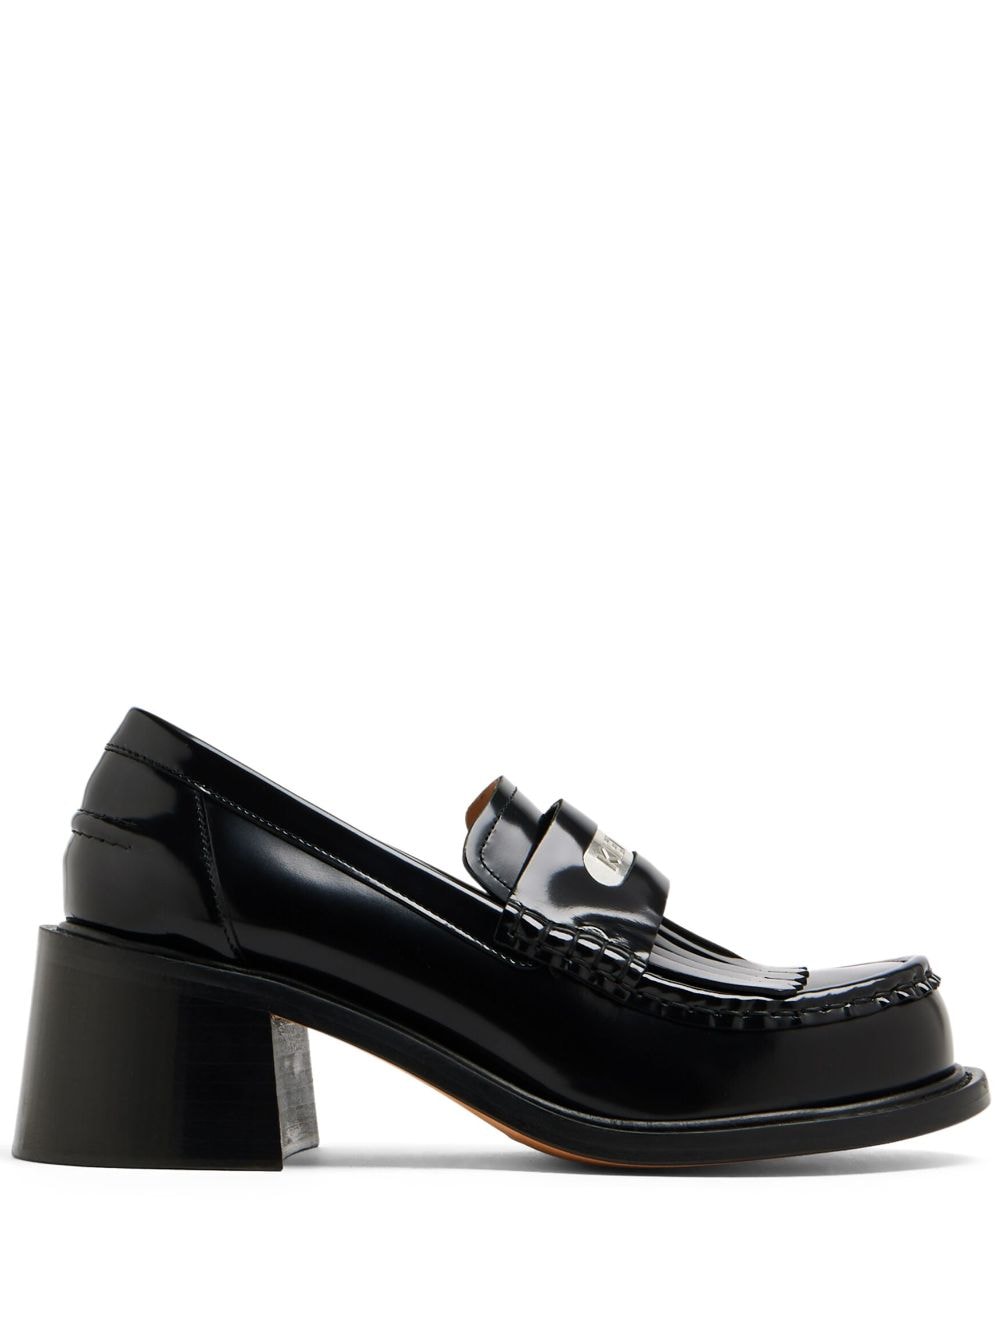 Kenzo 80mm Smile Leather Loafers In Black